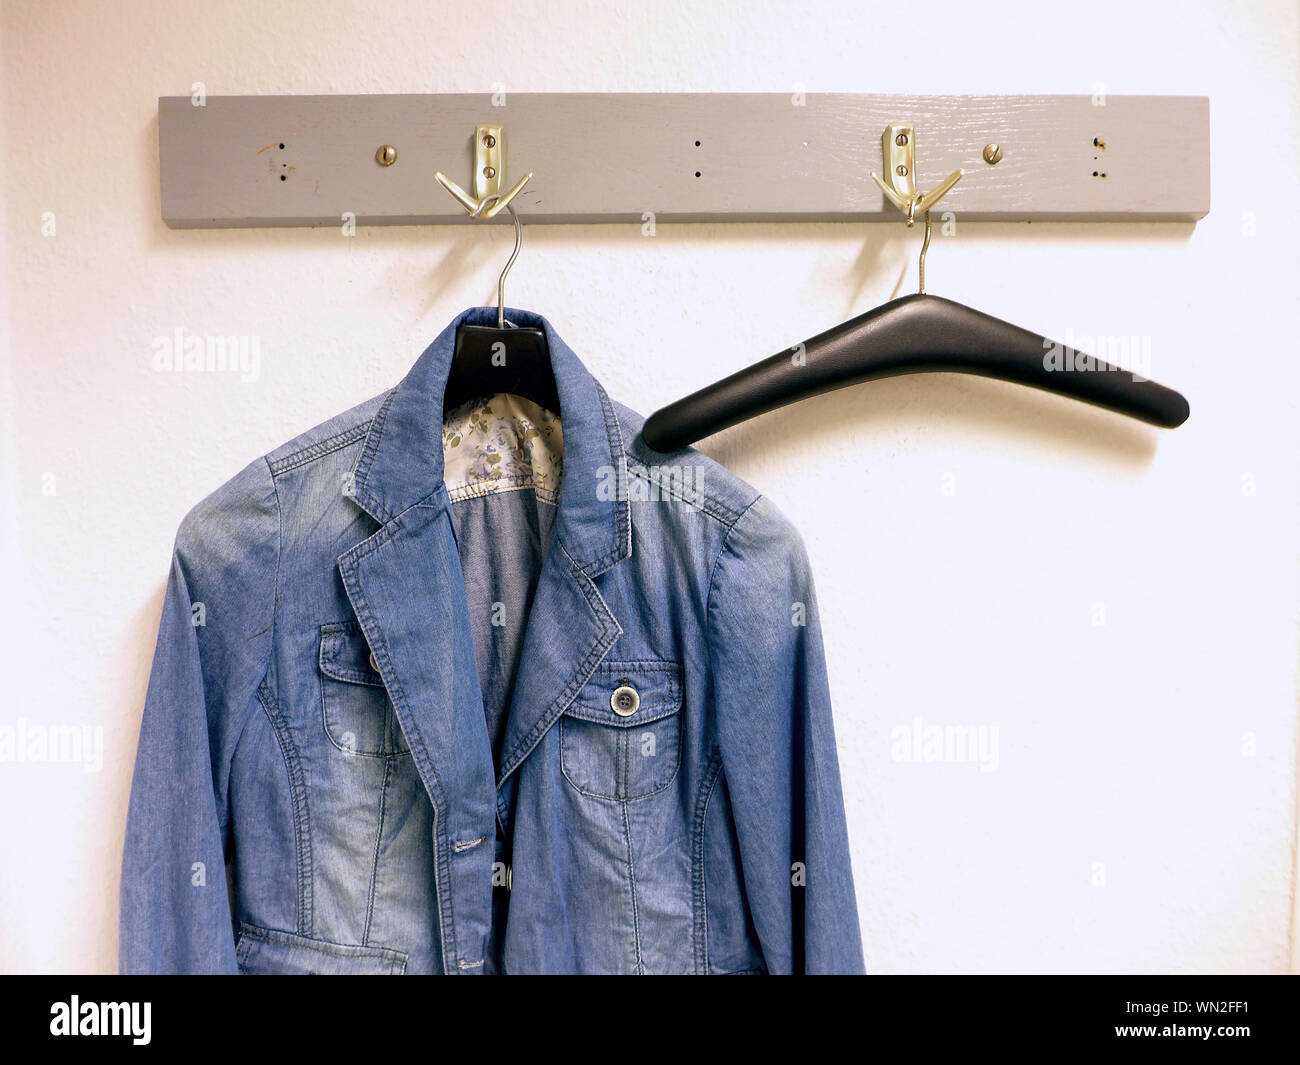 Jacket Hanging On Wall High Resolution Stock Photography and Images - Alamy